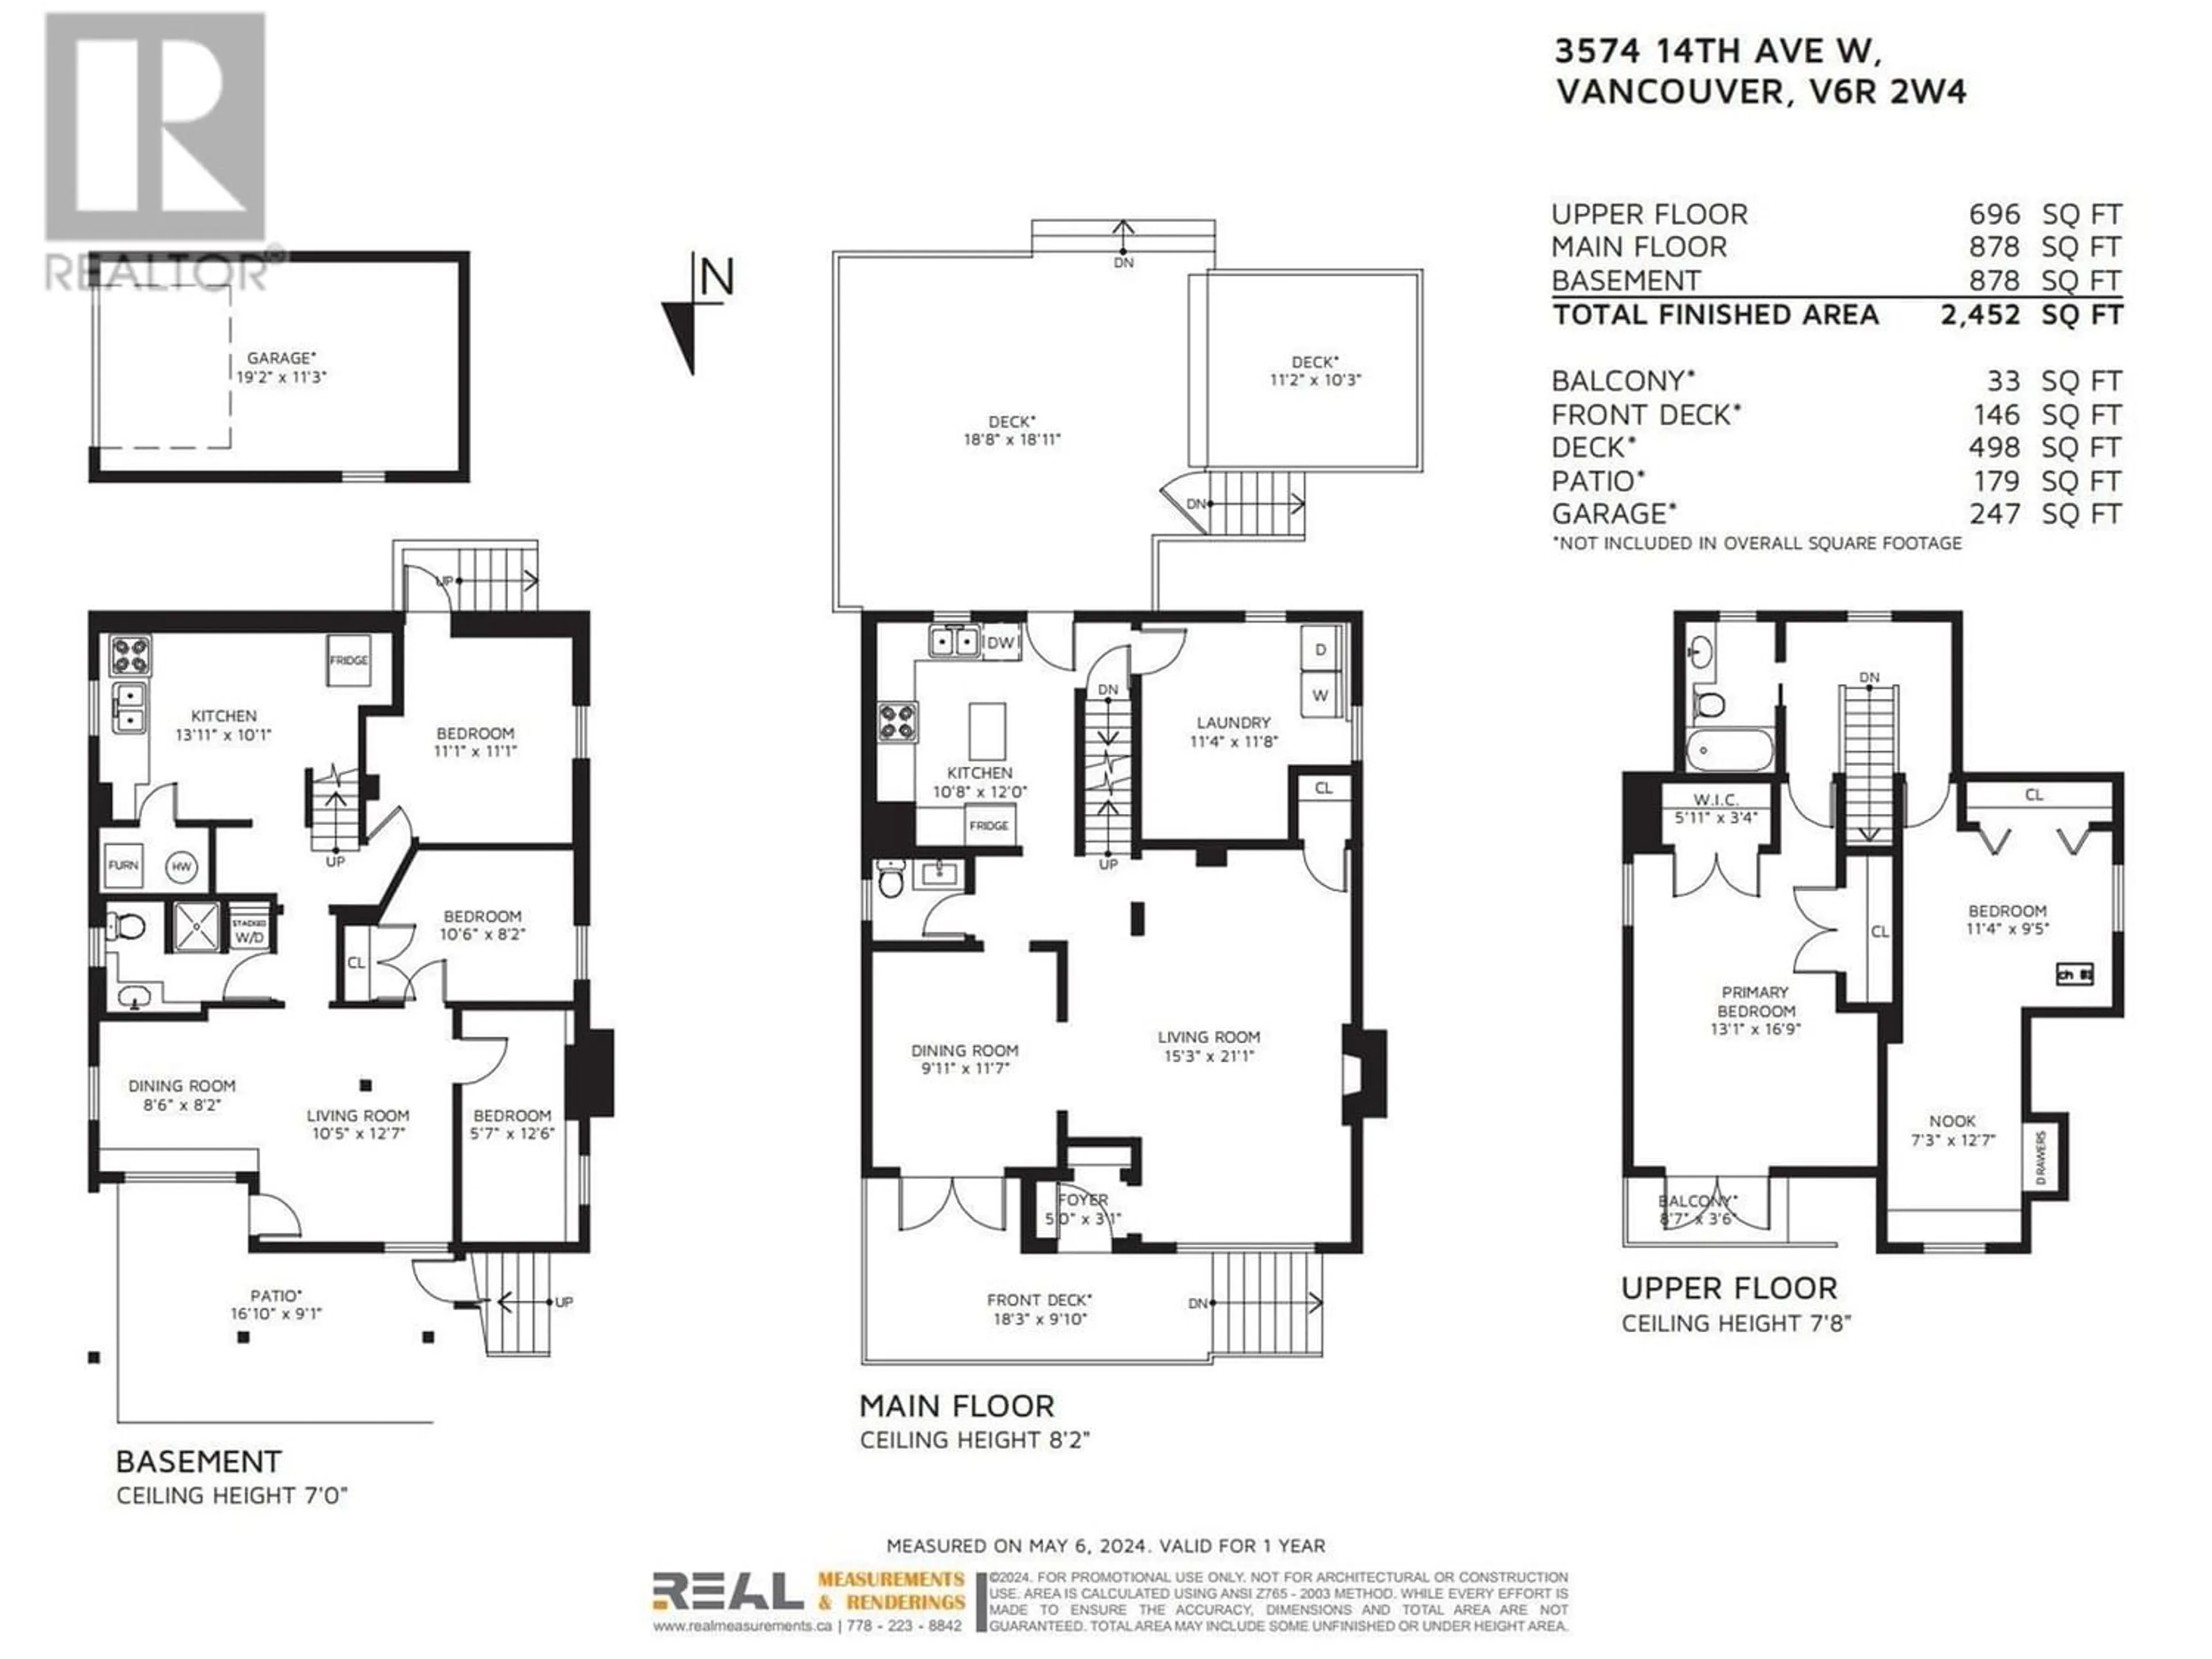 Floor plan for 3574 W 14TH AVENUE, Vancouver British Columbia V6R2W4